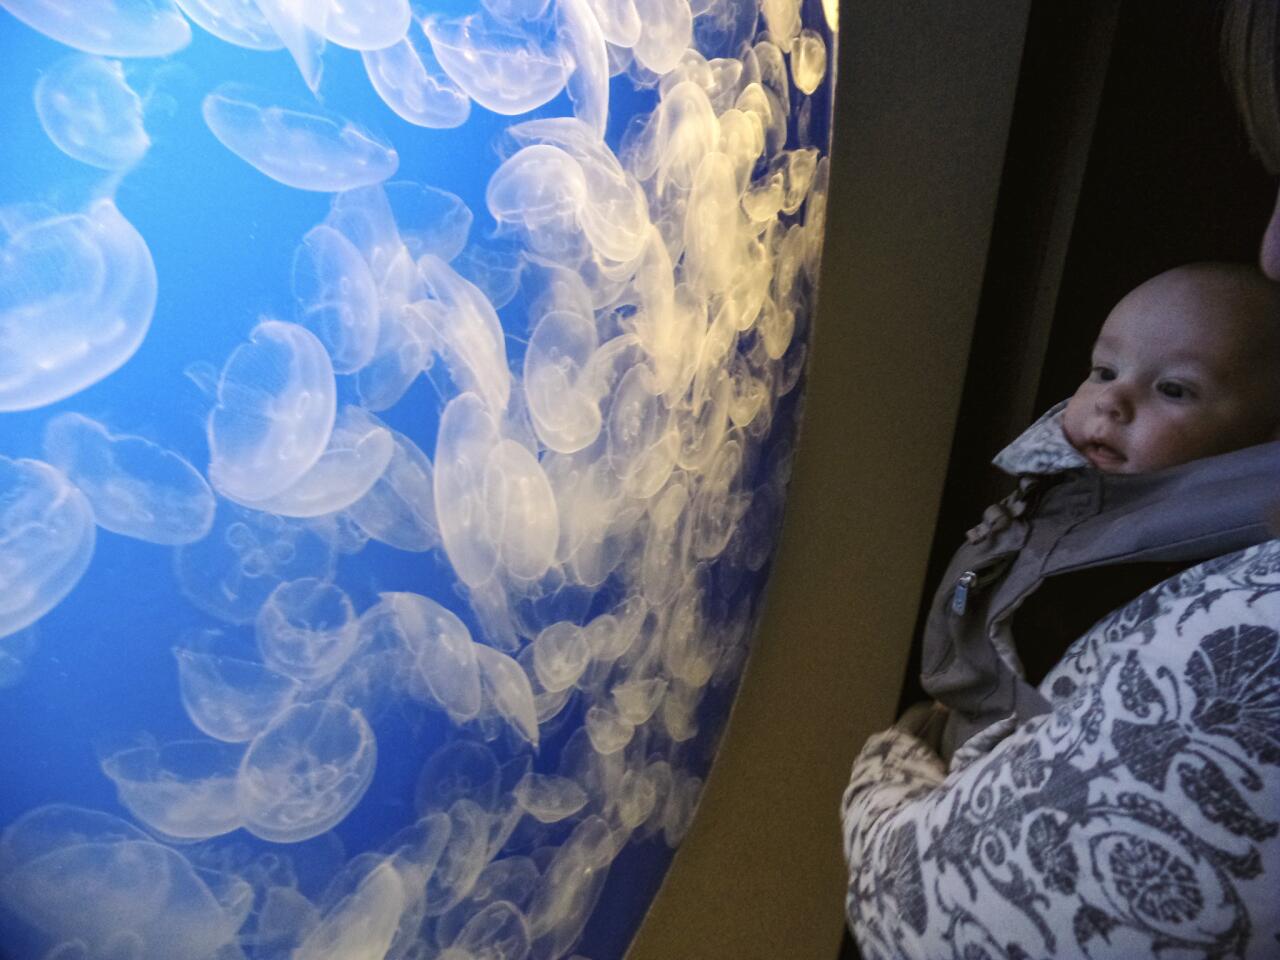 Reporter Mike Morris' baby, Augustus, checking out the moon jellies at the